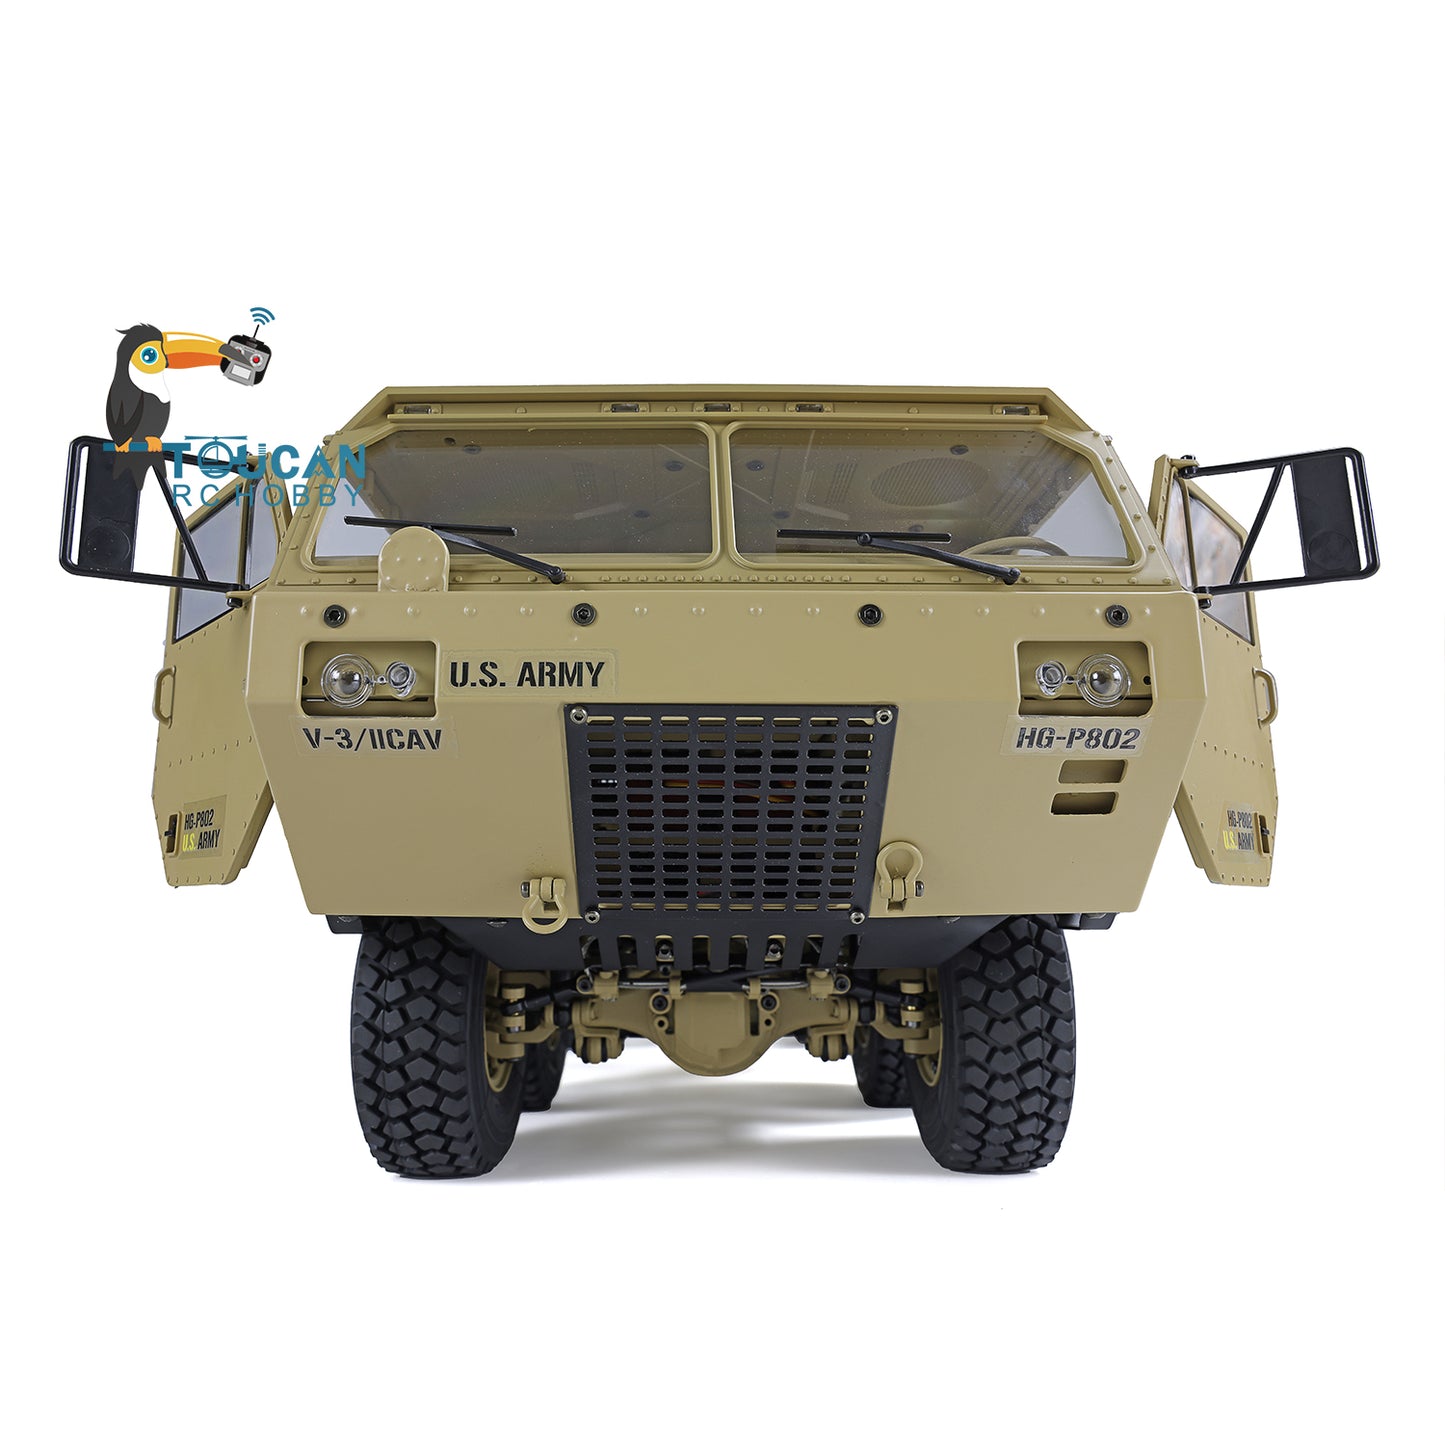 1/12 8x8 P802 Painted RC Military Truck Radio Control Car End Item Hobby Model Toy Car Electric Vehicle ESC Motor